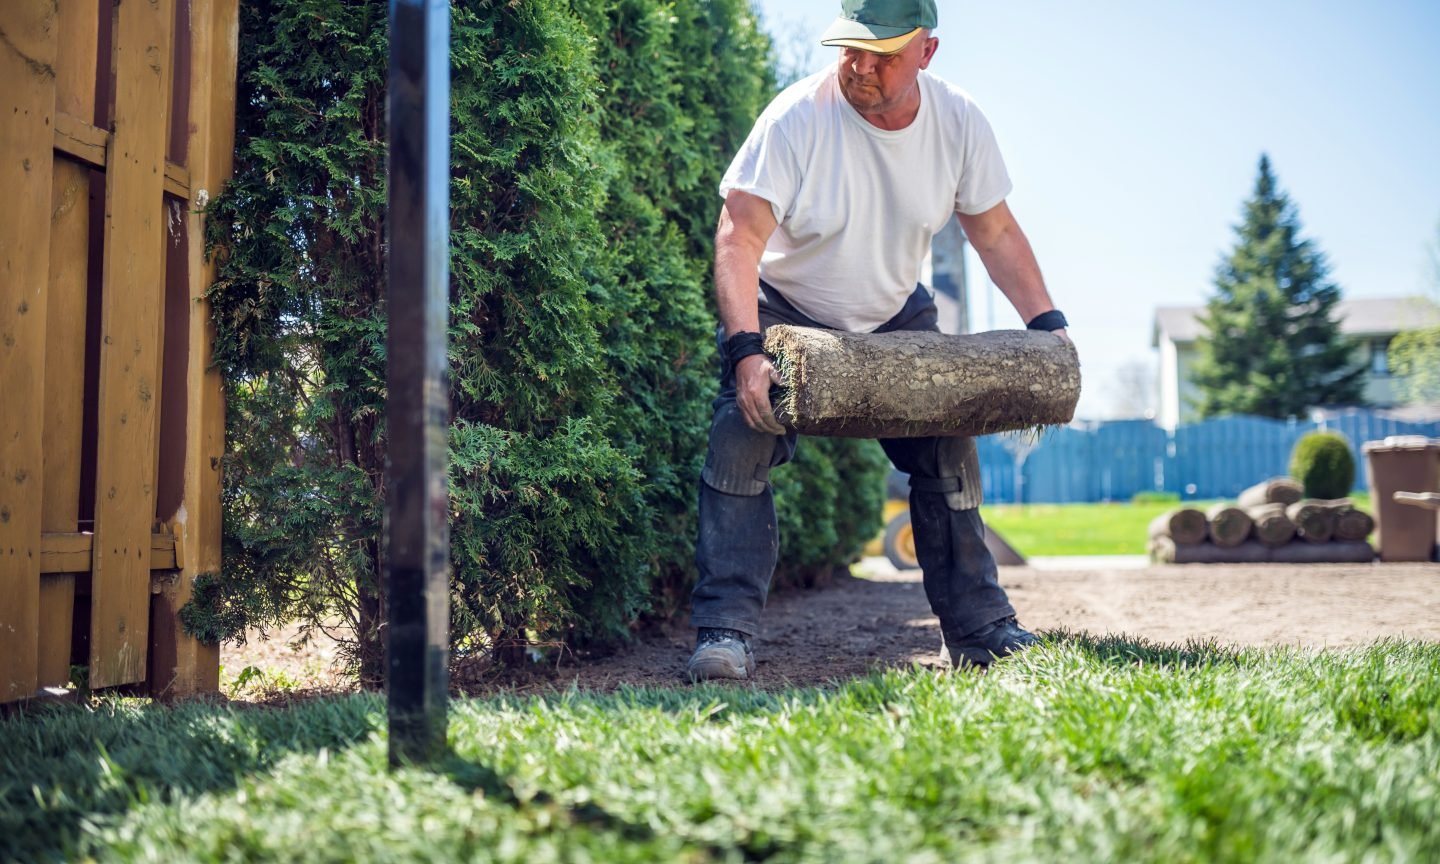 A Landscaping Or Lawn Care Business, How Much Does Landscapers Make An Hour